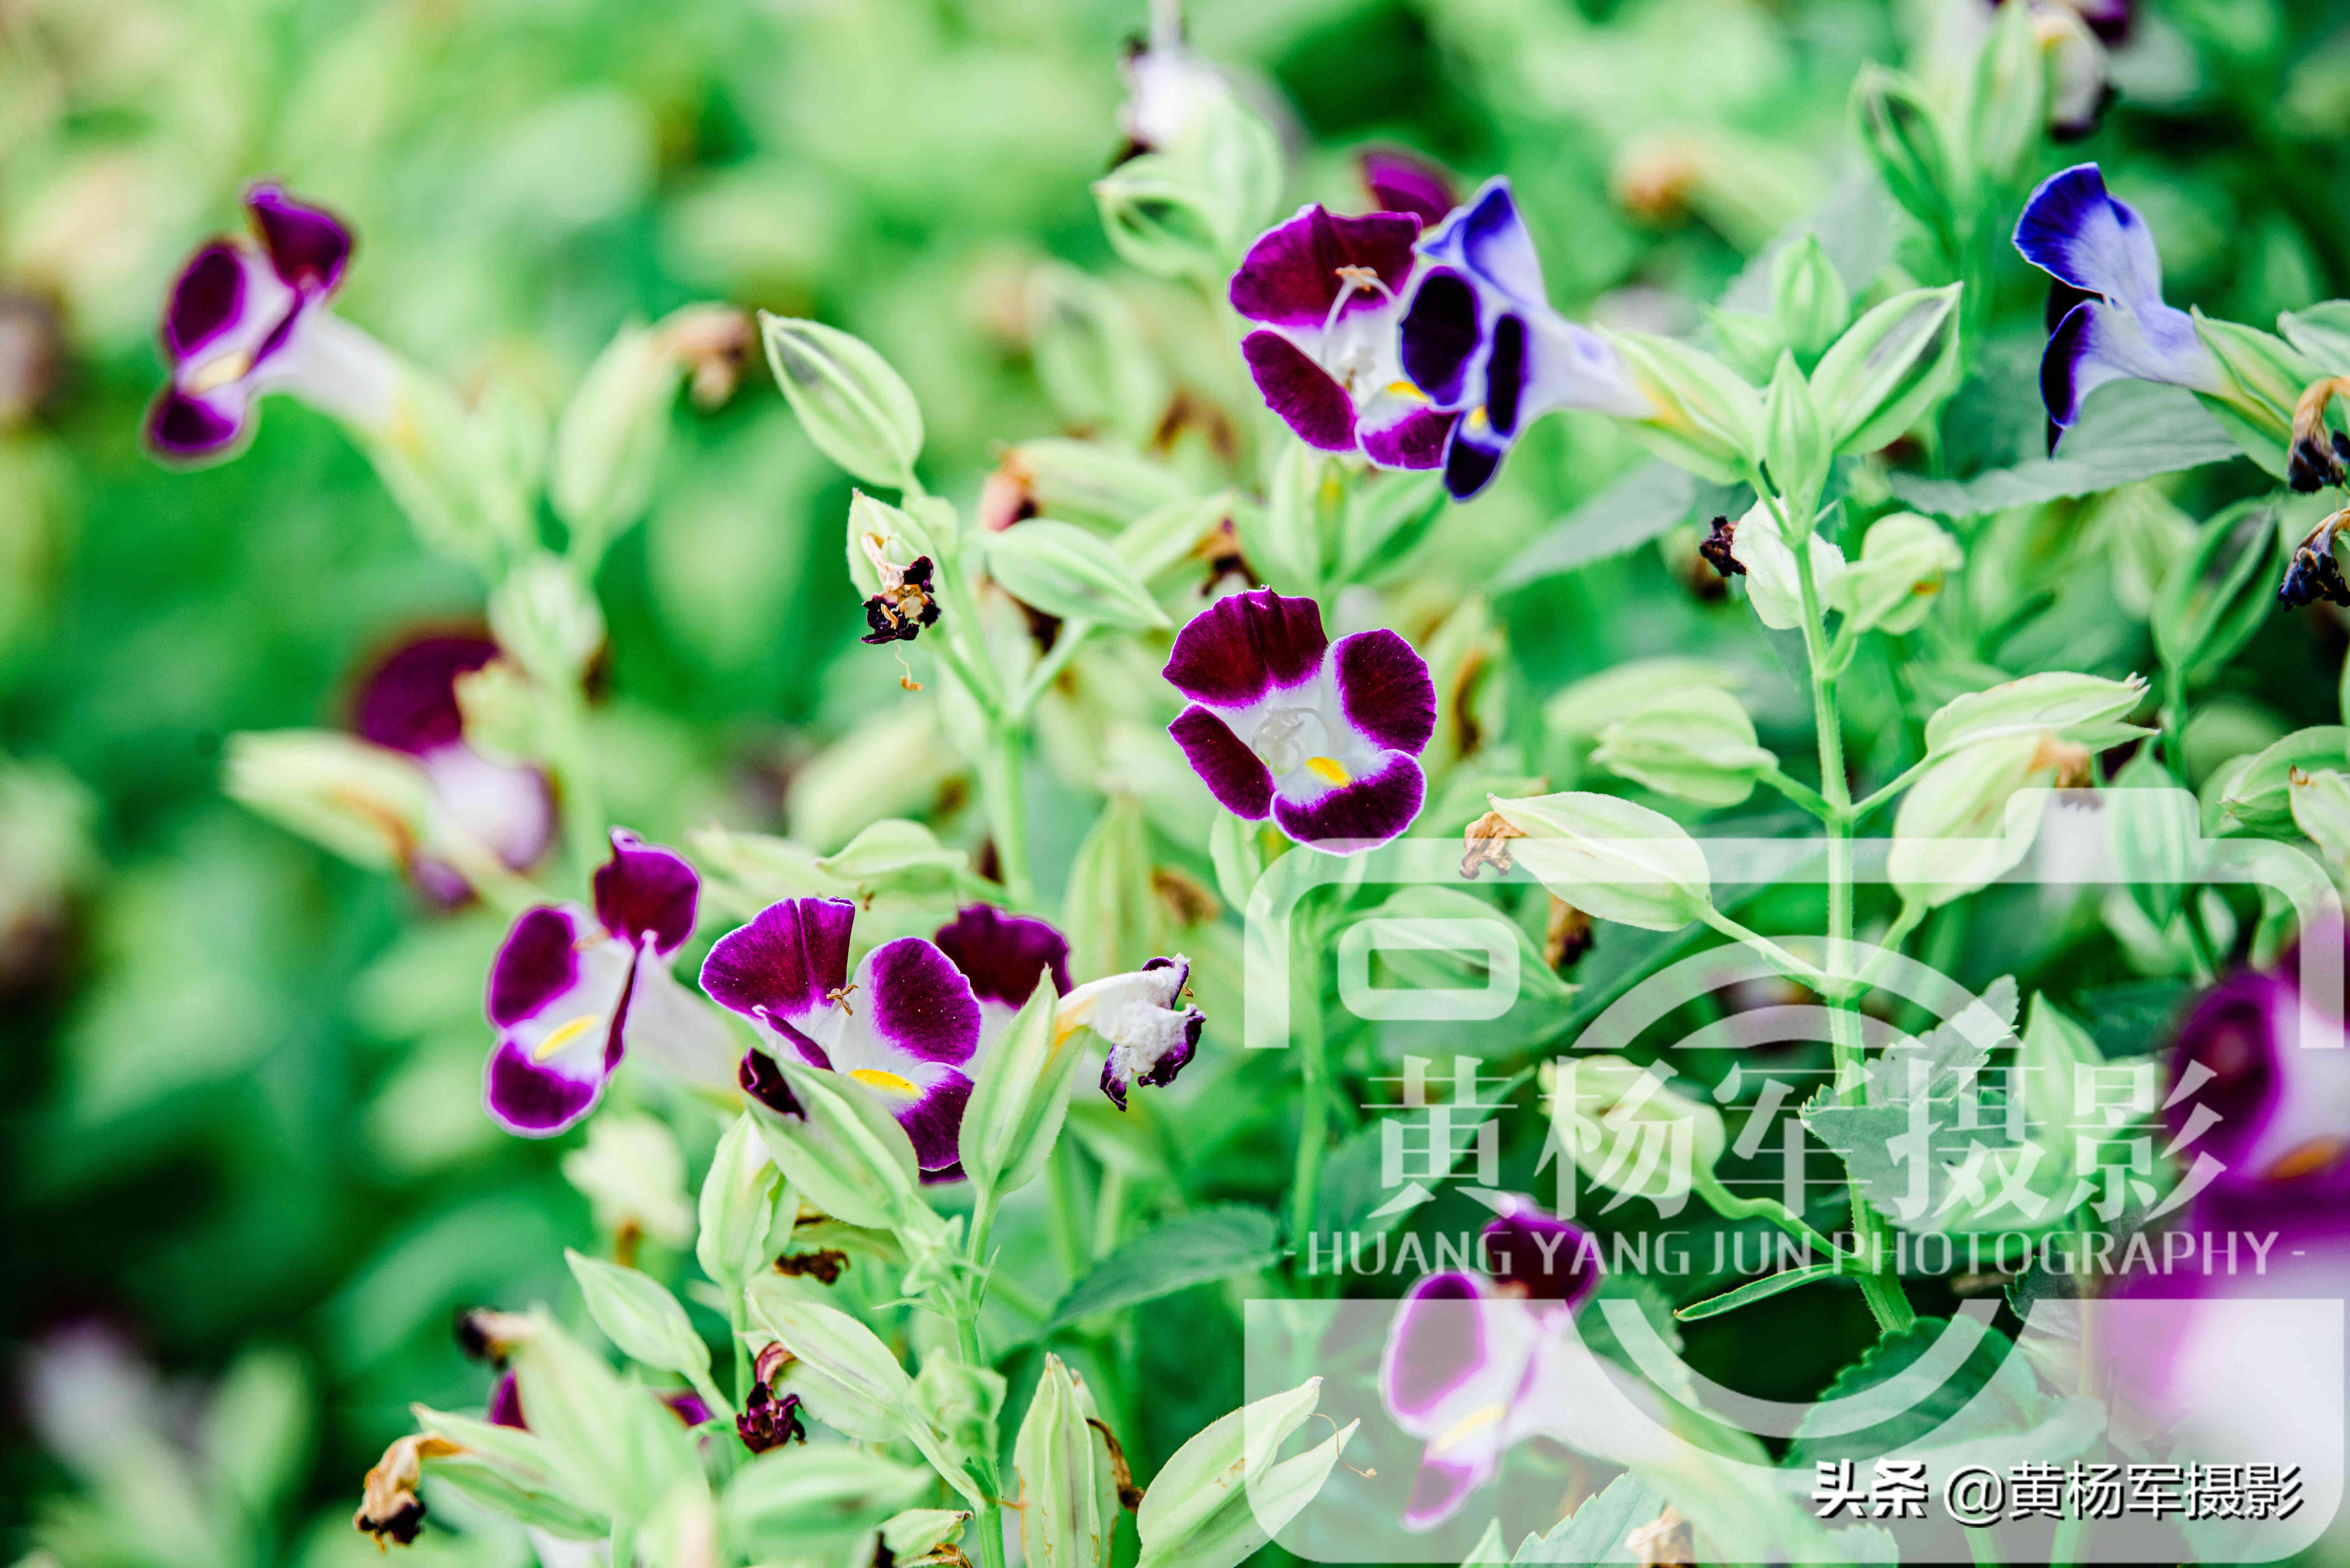 The fresh blooming blue pig ears in the green leaves, also known as Xia Jinhua, are flowers are very beautiful - iNEWS